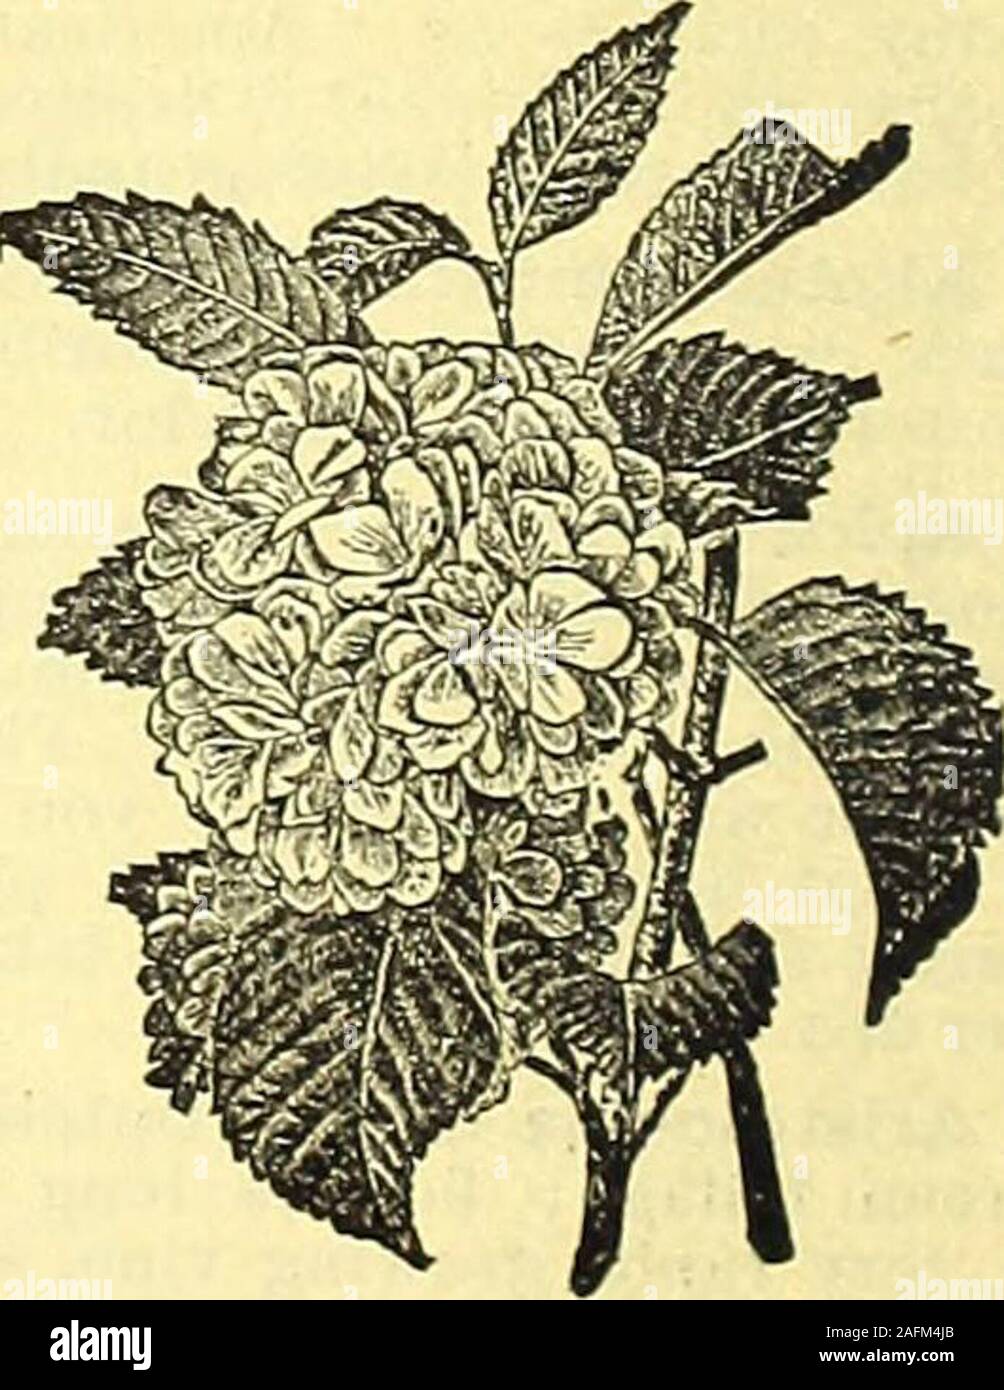 . Manual of everything for the garden : 1894. ANDIFLORA. very fine.The finest golden-leaved shrub, JAPAN SNOWBALL. (Viburnum Plicatum.) A new variety of Snowball from Japan, andone of the grandest shrubs in existence. Growthupright and compact. Foliage olive greenthrough the summer, but toward fall it turnsmuch darker and remains on the plant for sometime after the first frosts. Flowers 4 to 6 inchesacross. The leaves are in pairs along the stem,and from the base of each leaf a ball of flowersappears. There are often as many as ten pairsof these, or twenty balls, on a branch 18 incheslong. The Stock Photo